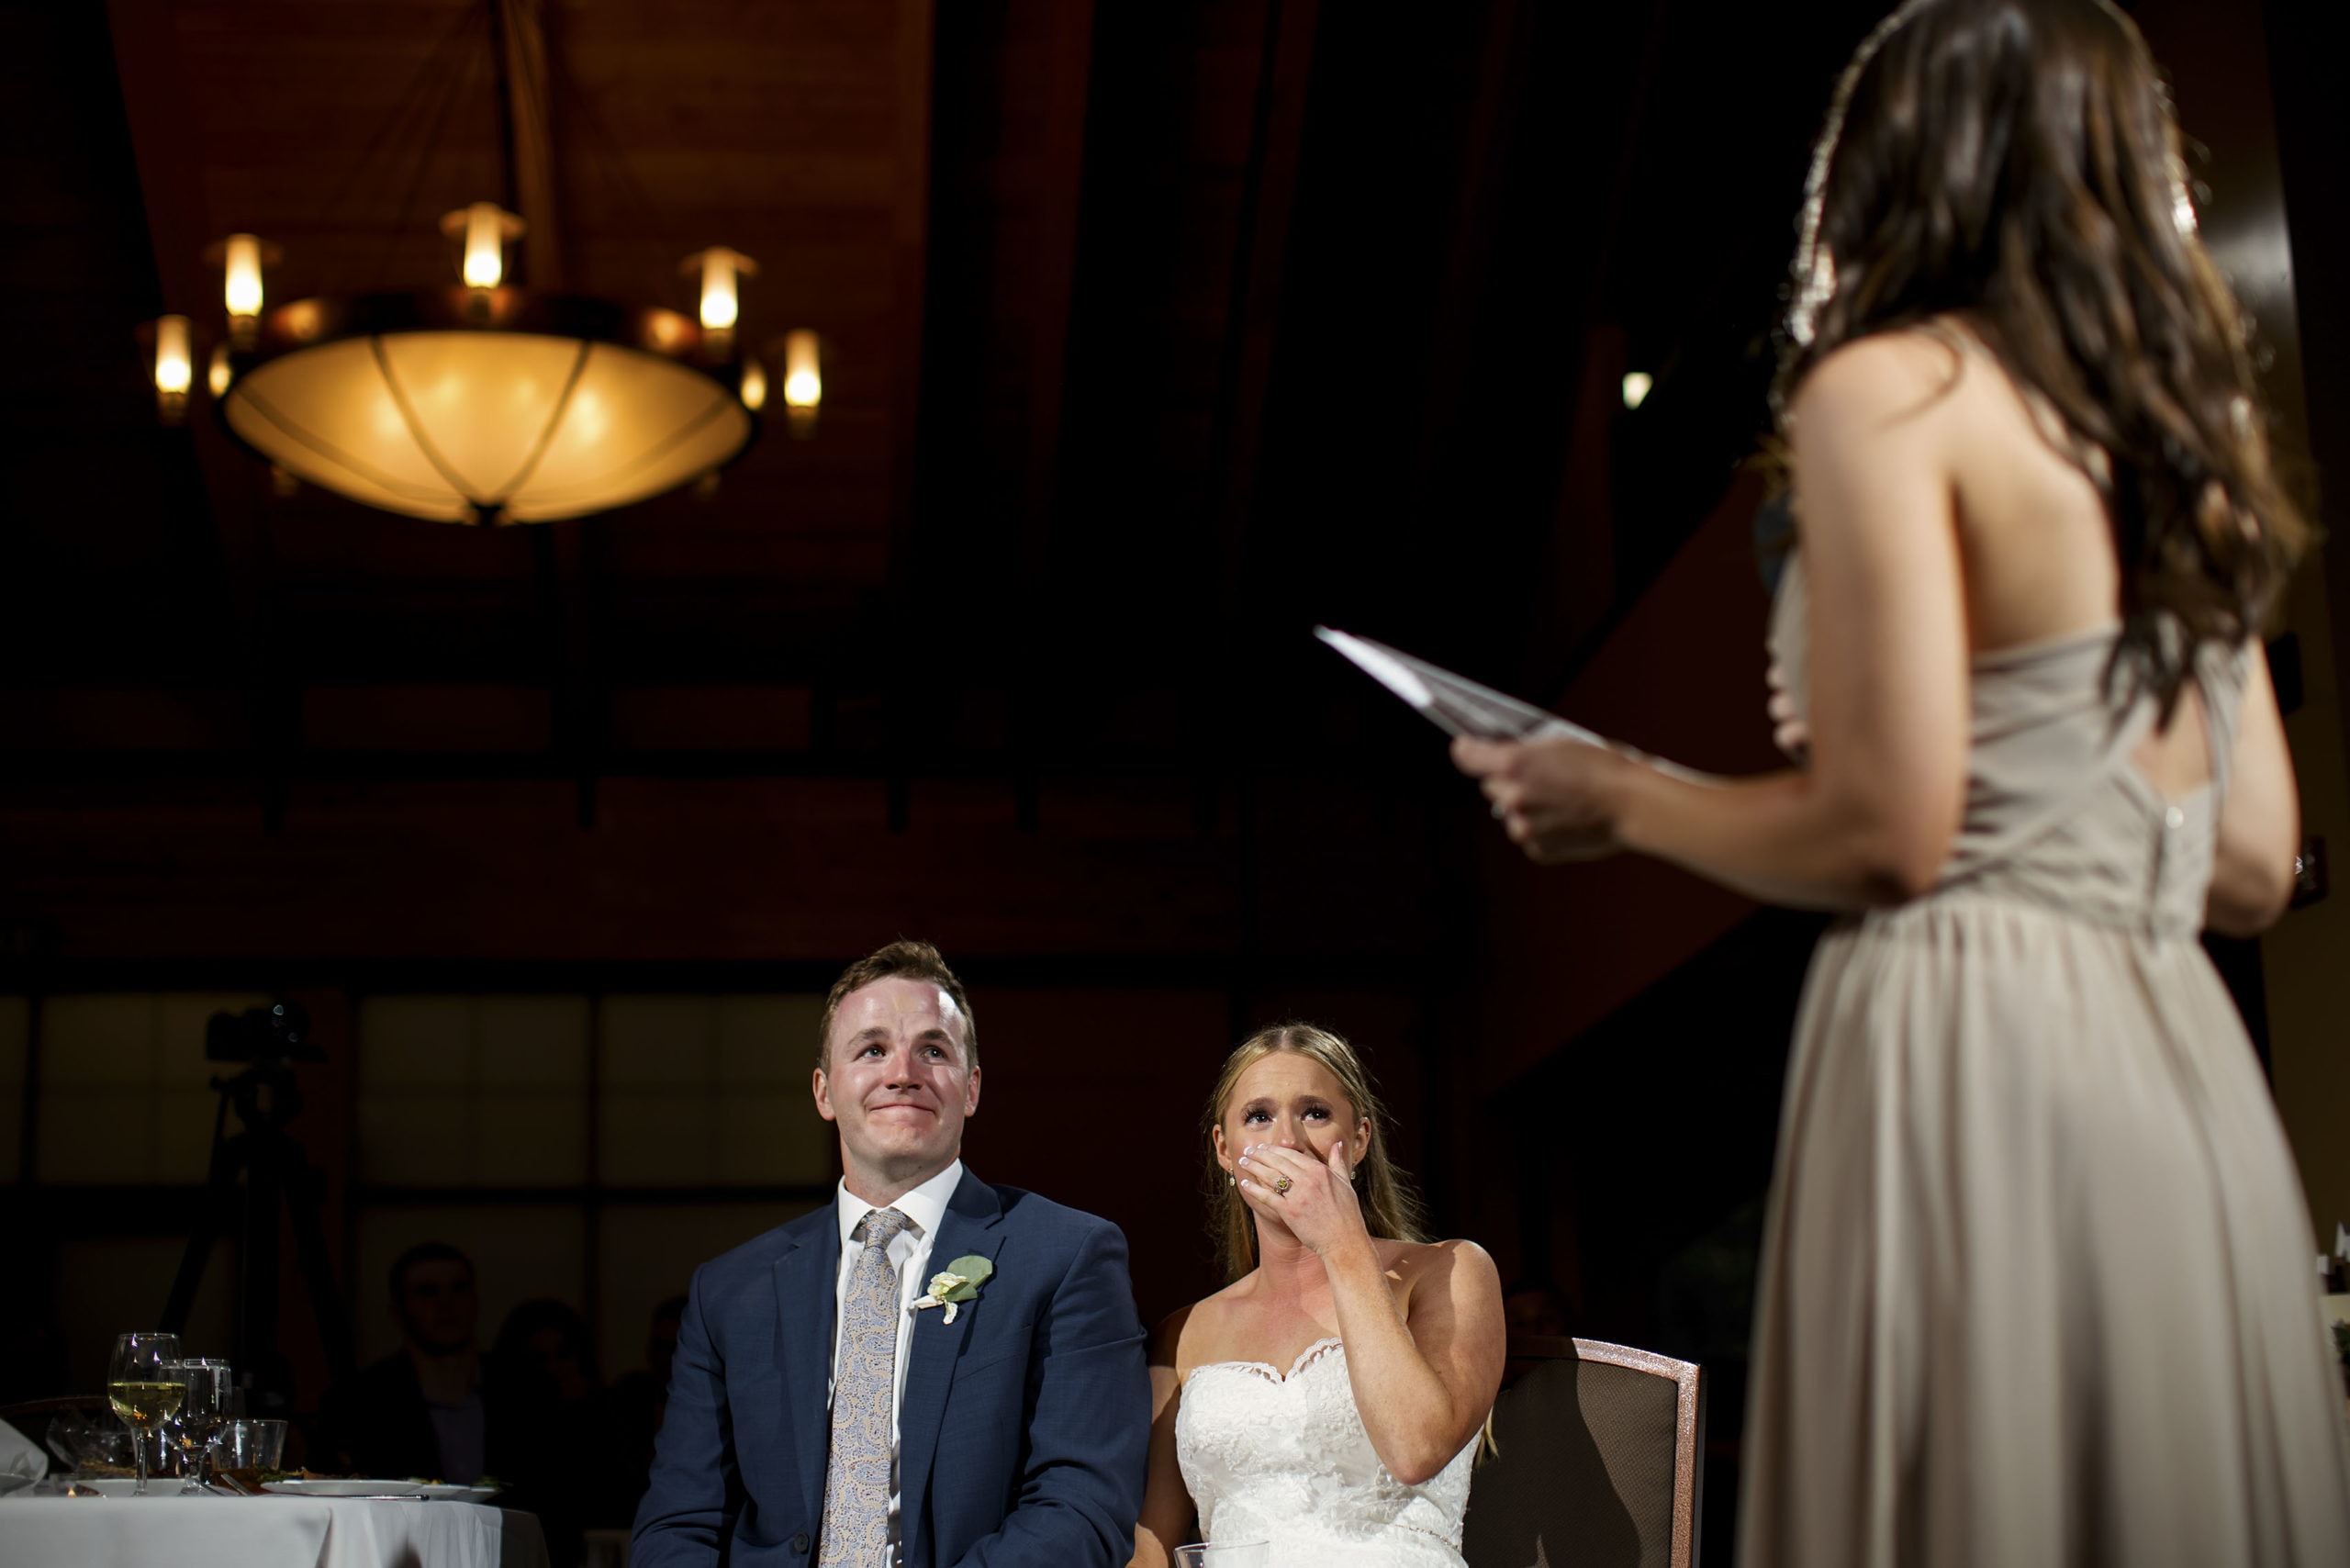 The maid of honor gives a toast as the bride and groom react during a wedding reception in the Grand Hall at Copper Station